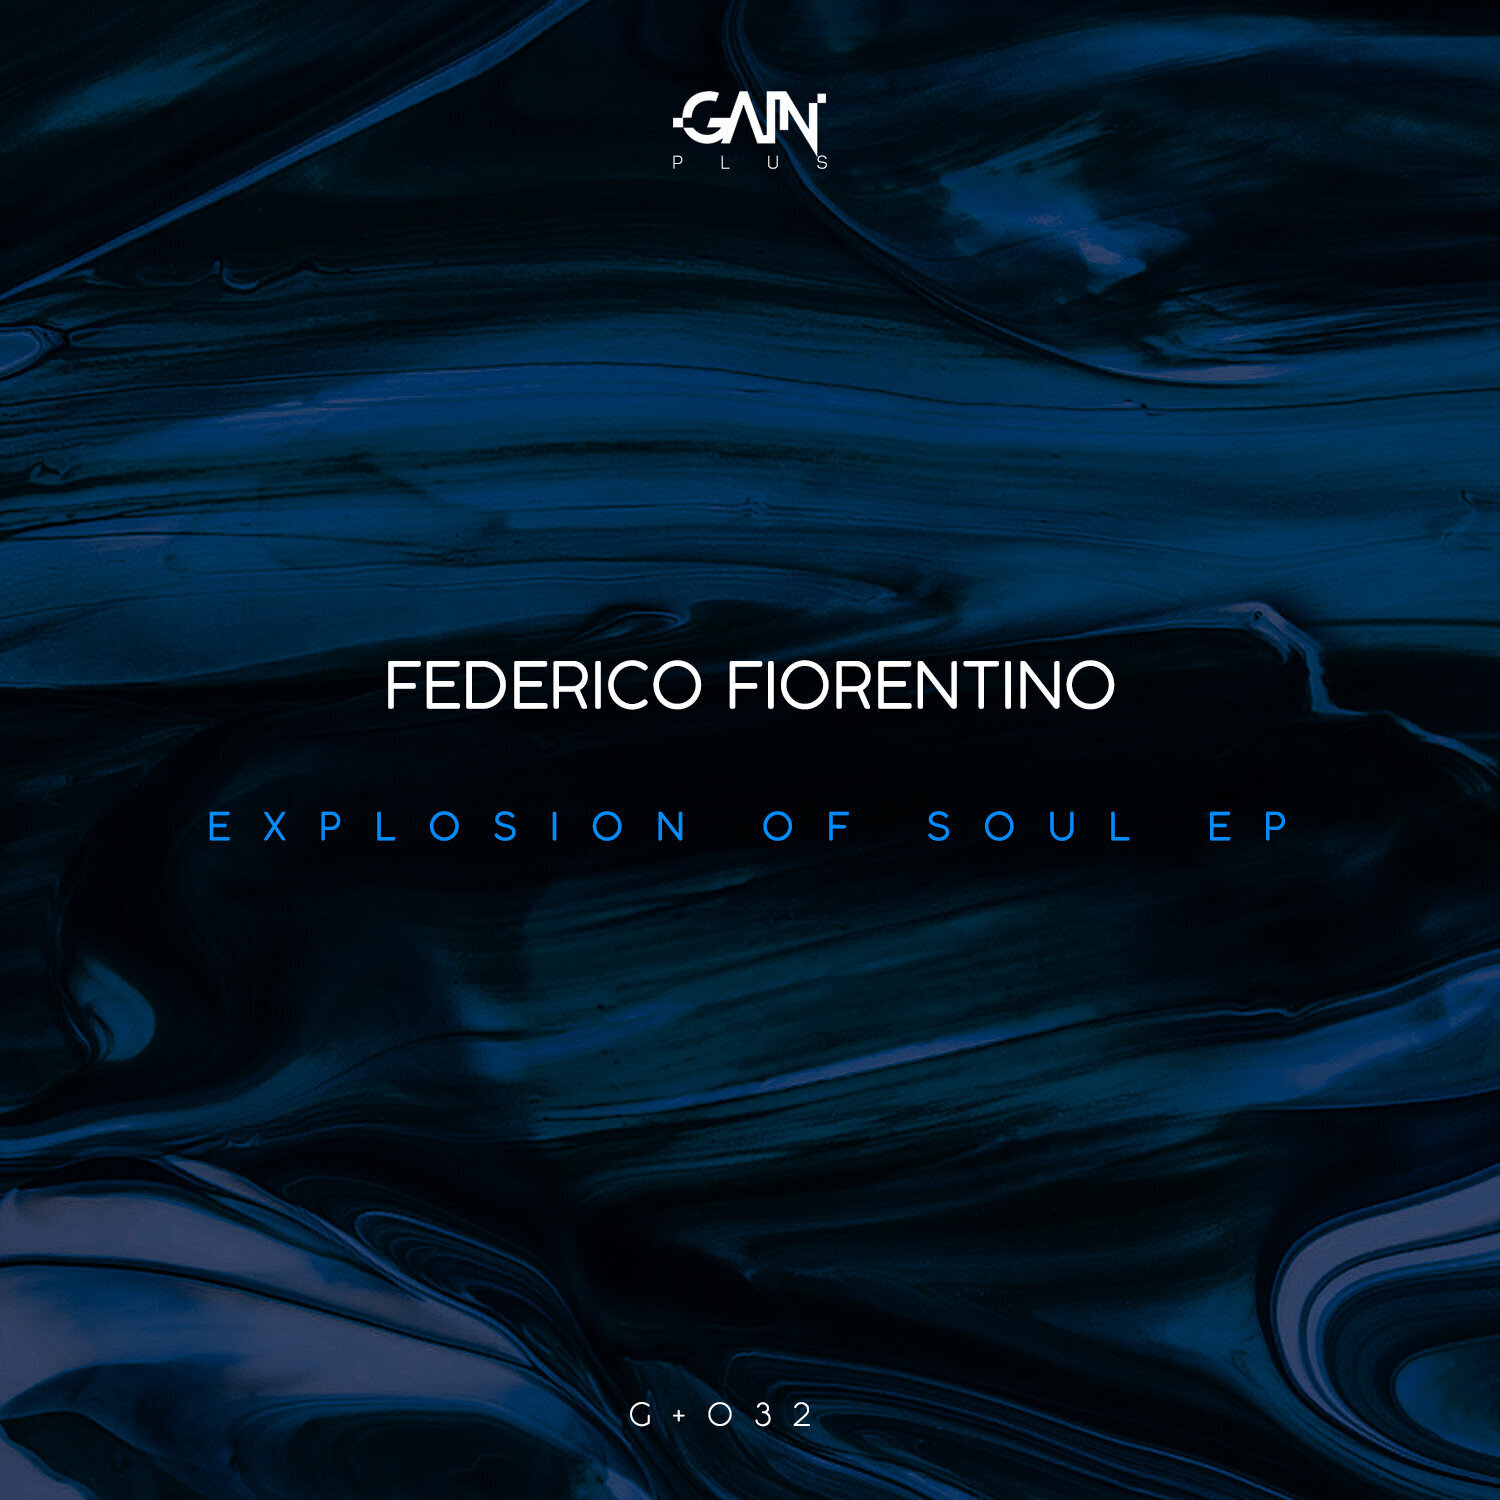 �������� �������������� | �������� ��������  Labels founded by Sisko Electrofanatik based on a modern techno music project. We're pleased to presents the upcoming release and upgrade on Gain Records 3.0  Coming up Yellowheads, Pablo Say, Fatima Hajji, Hollen, Dok & Martin, MT93, Joy Kitikonti, Alberto Ruiz and more.. 